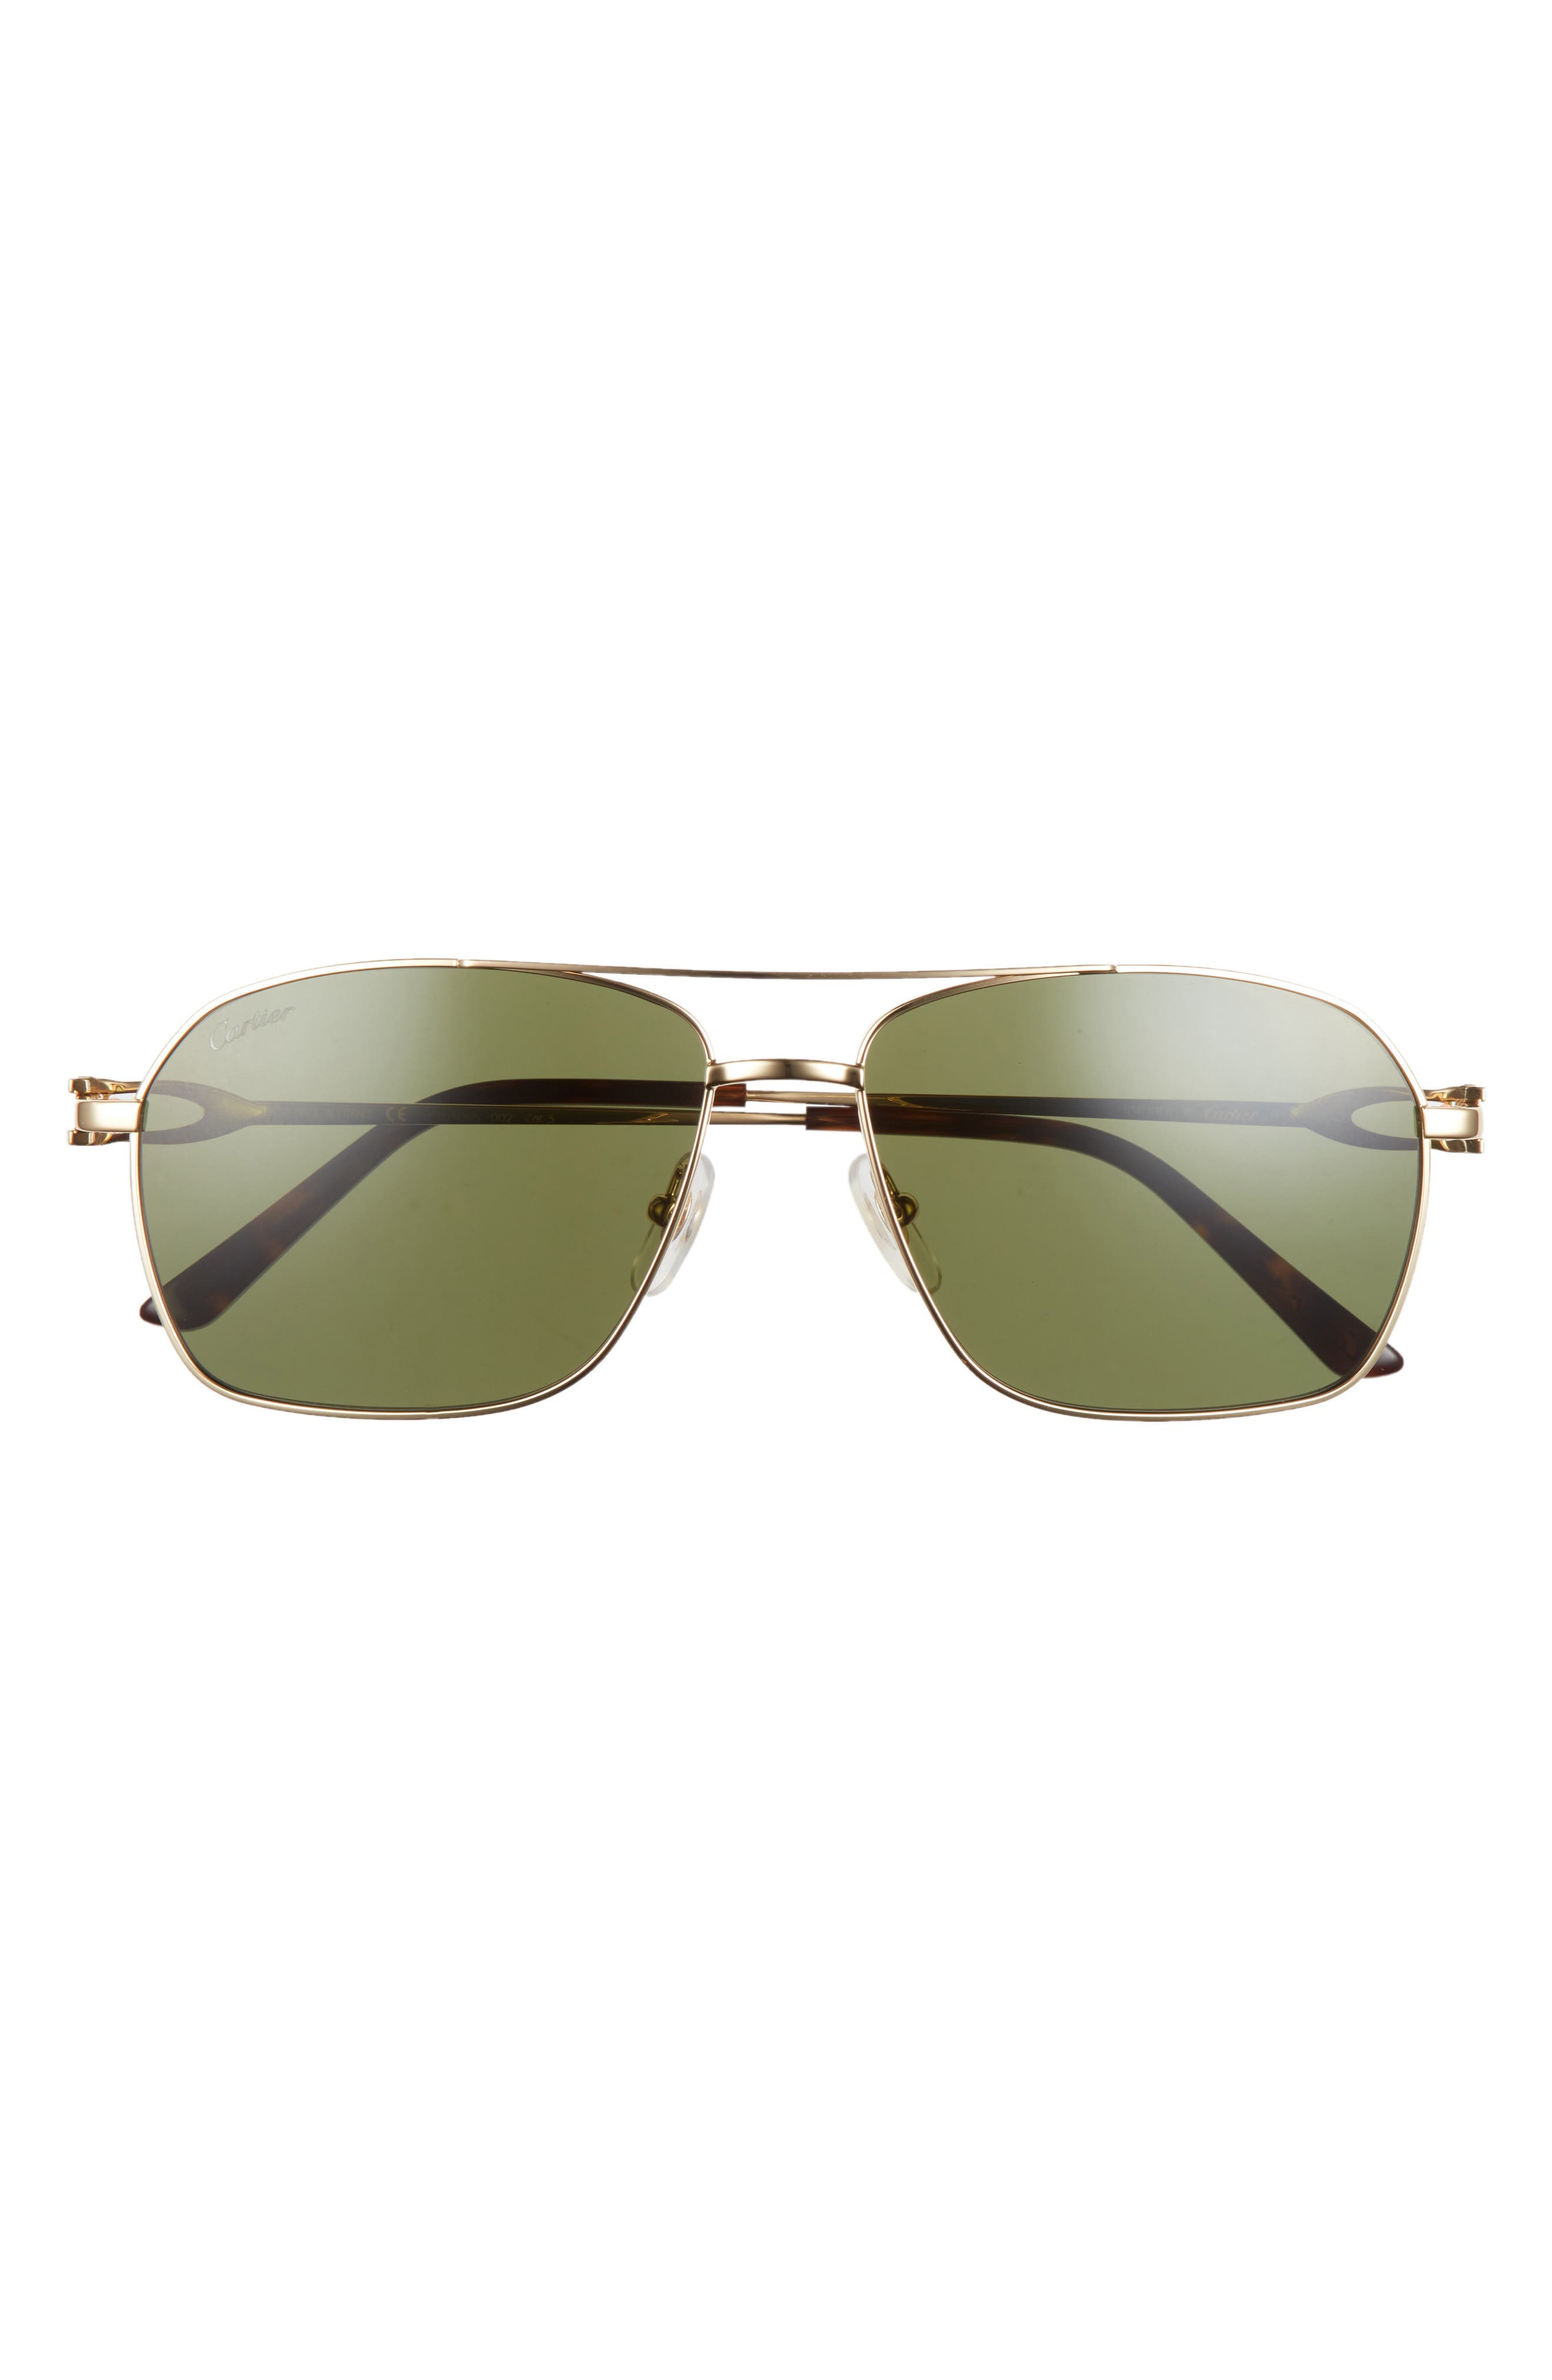 Cartier 59mm Aviator Sunglasses in Gold/Green at Nordstrom